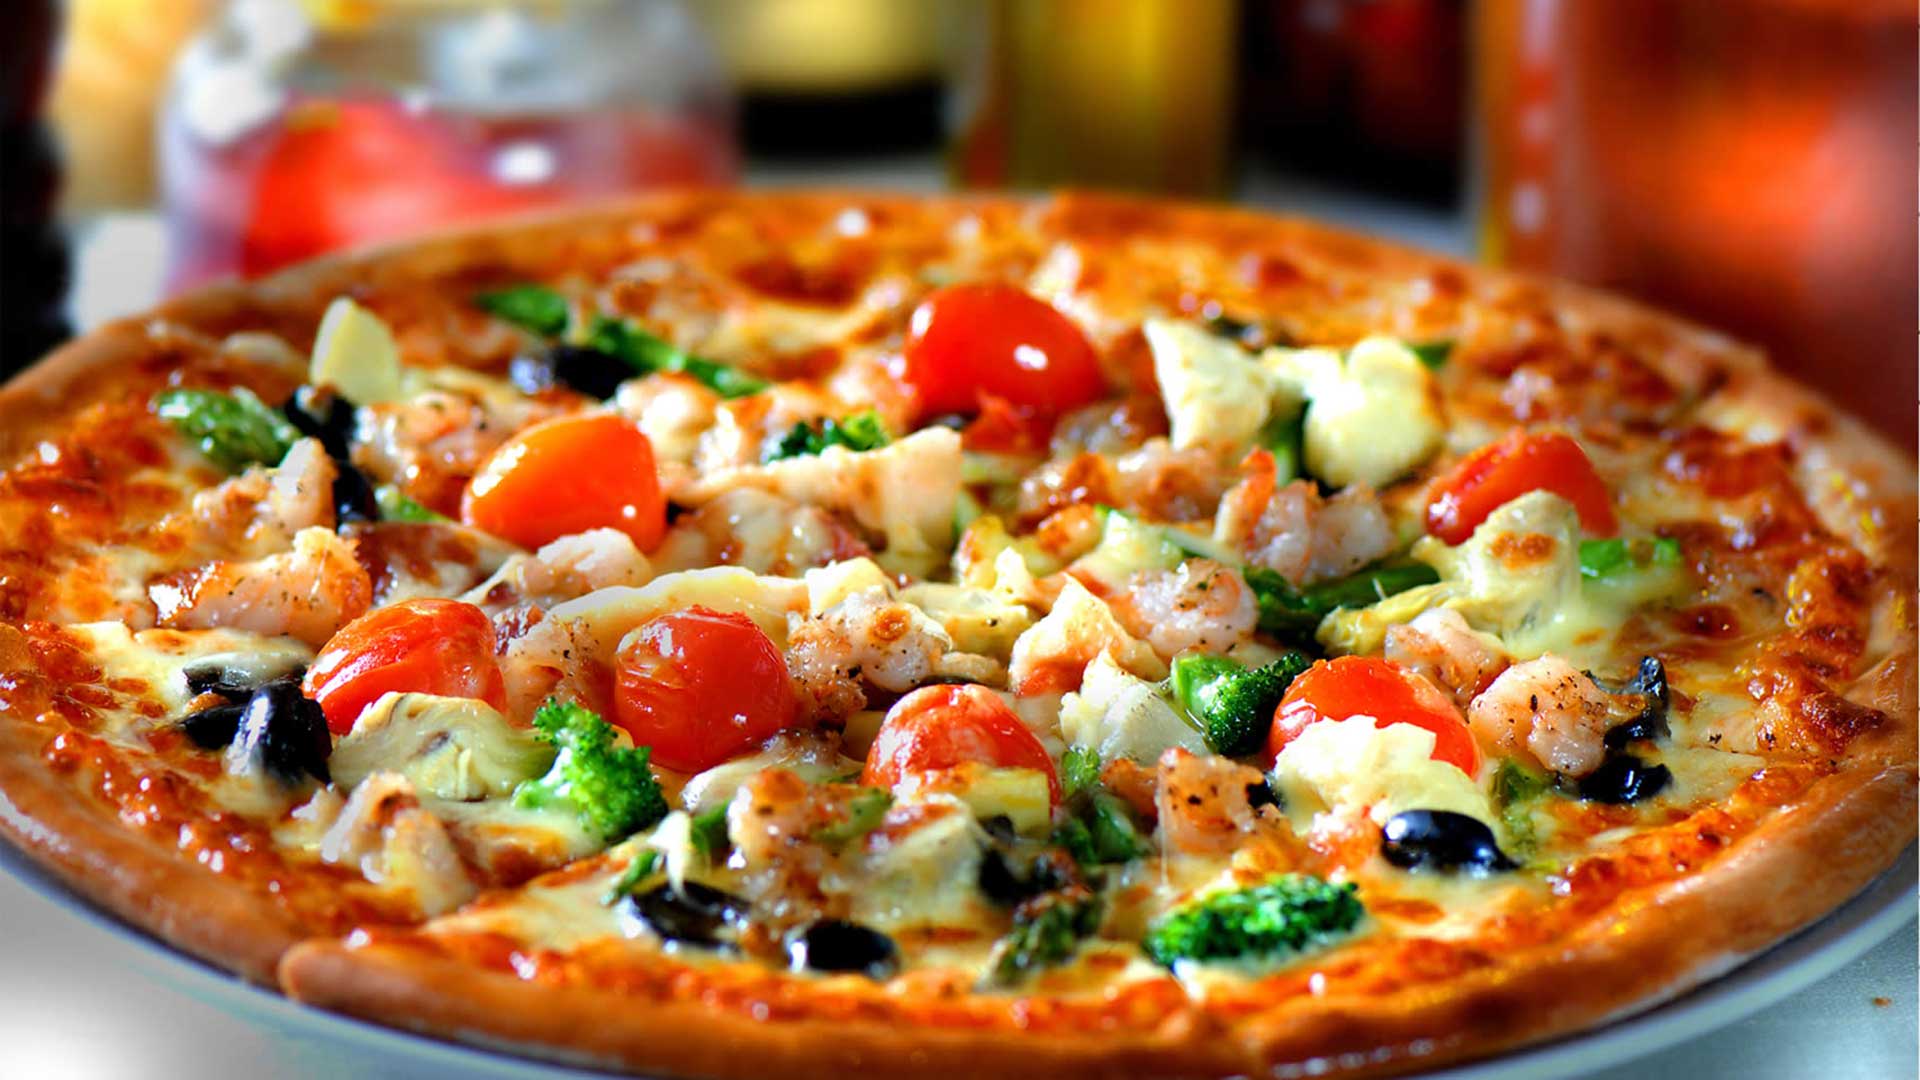 http://ptownpizza.com/images/Food/Pizza/Pizza01.jpg